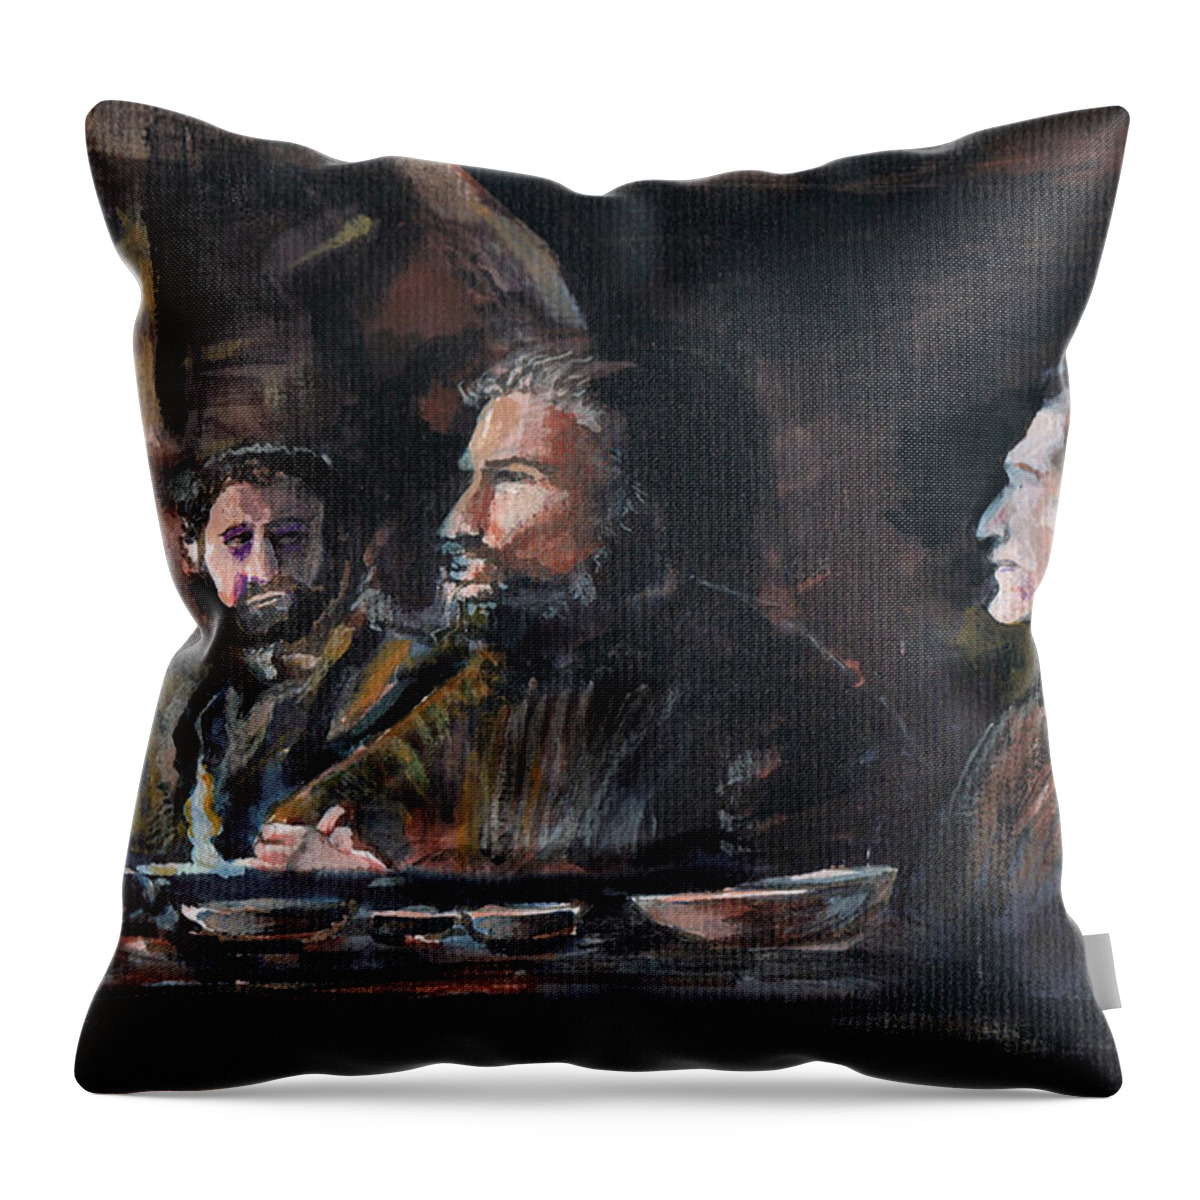 Do This In Remembrance Of Me Throw Pillow featuring the painting Do This In Remembrance of Me by Seth Weaver